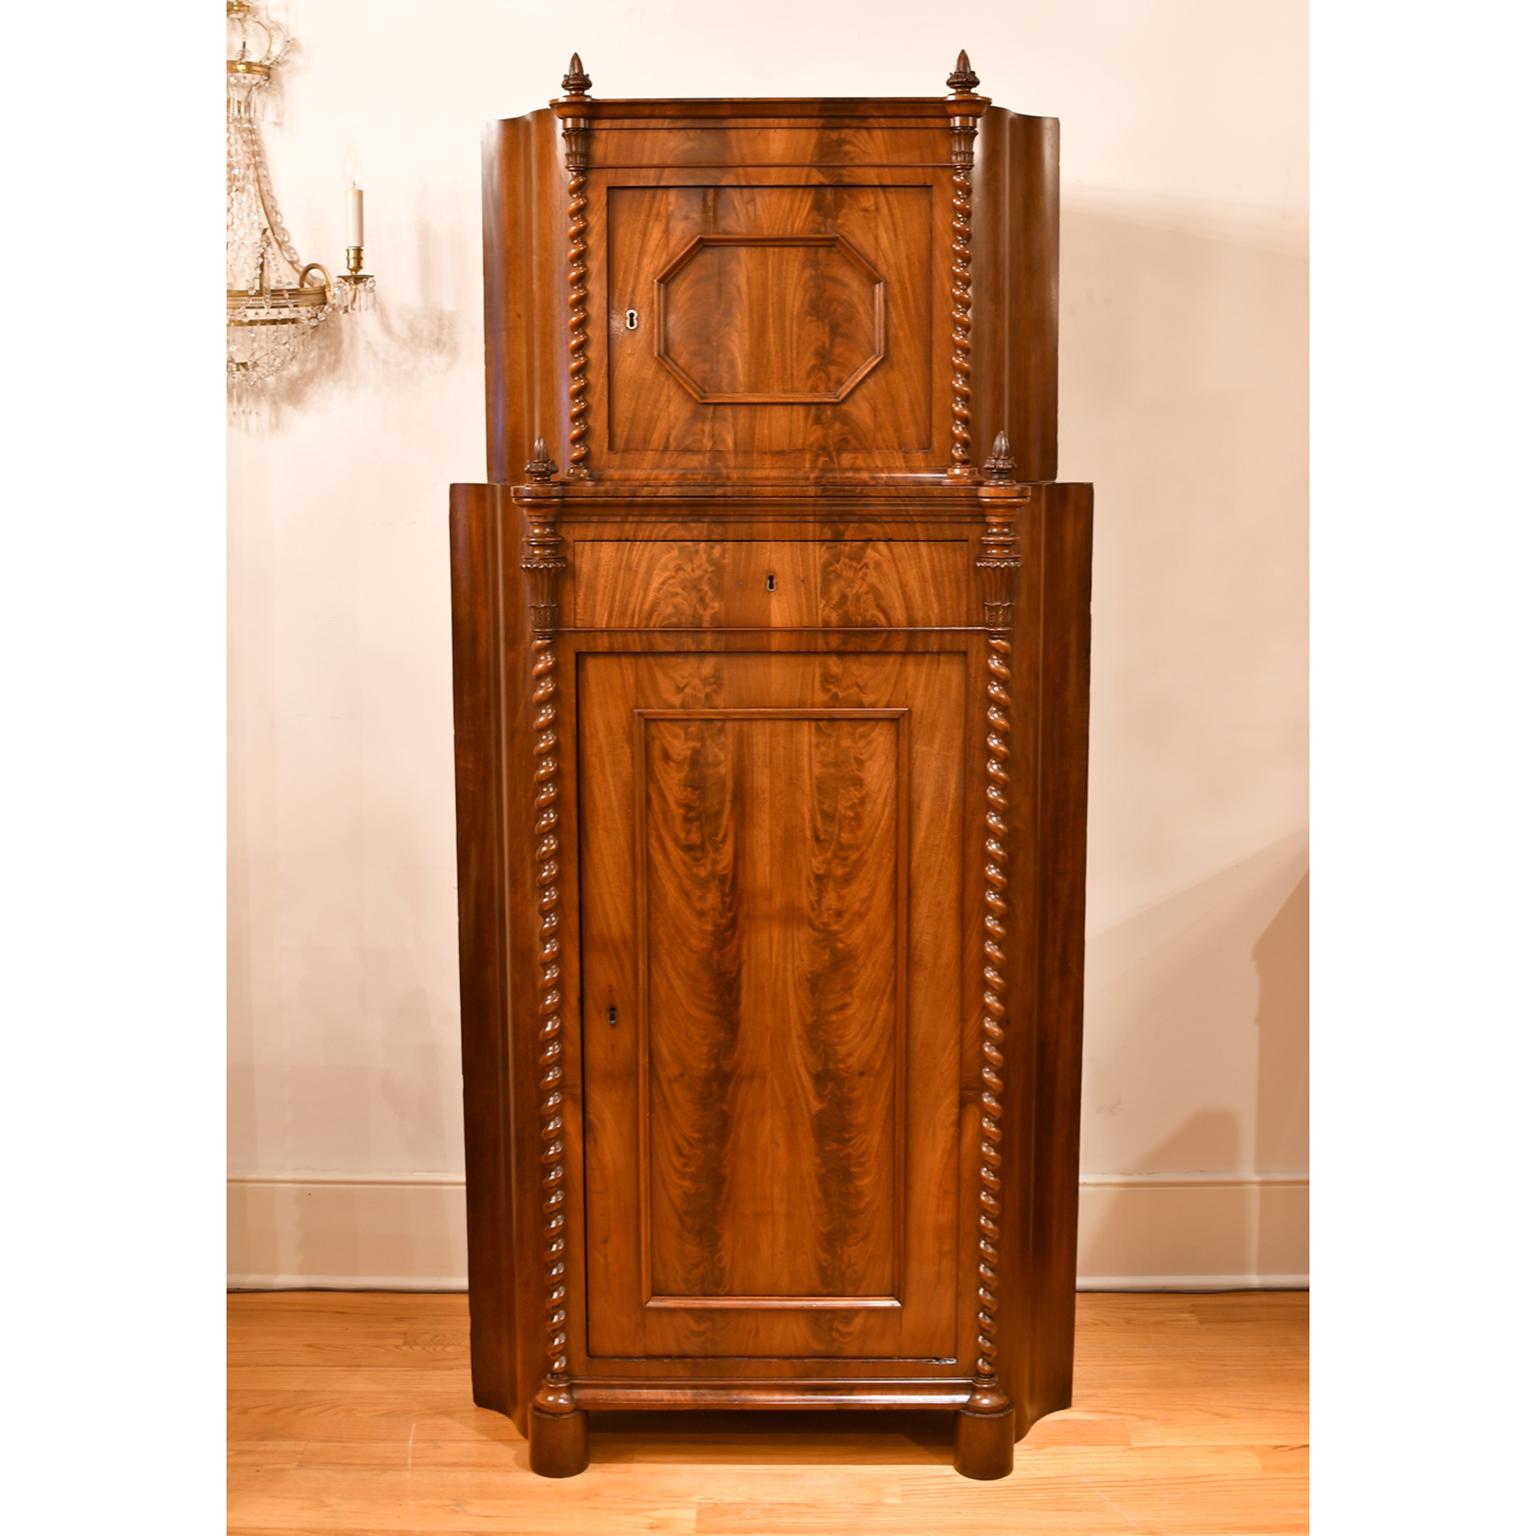 A very handsome Empire corner cupboard in Fine West Indies mahogany whose beautiful figuring is highlighted by the expert book-matching throughout. Features a smaller cabinet with octagonal-shaped panel on the top door, that rests over a larger